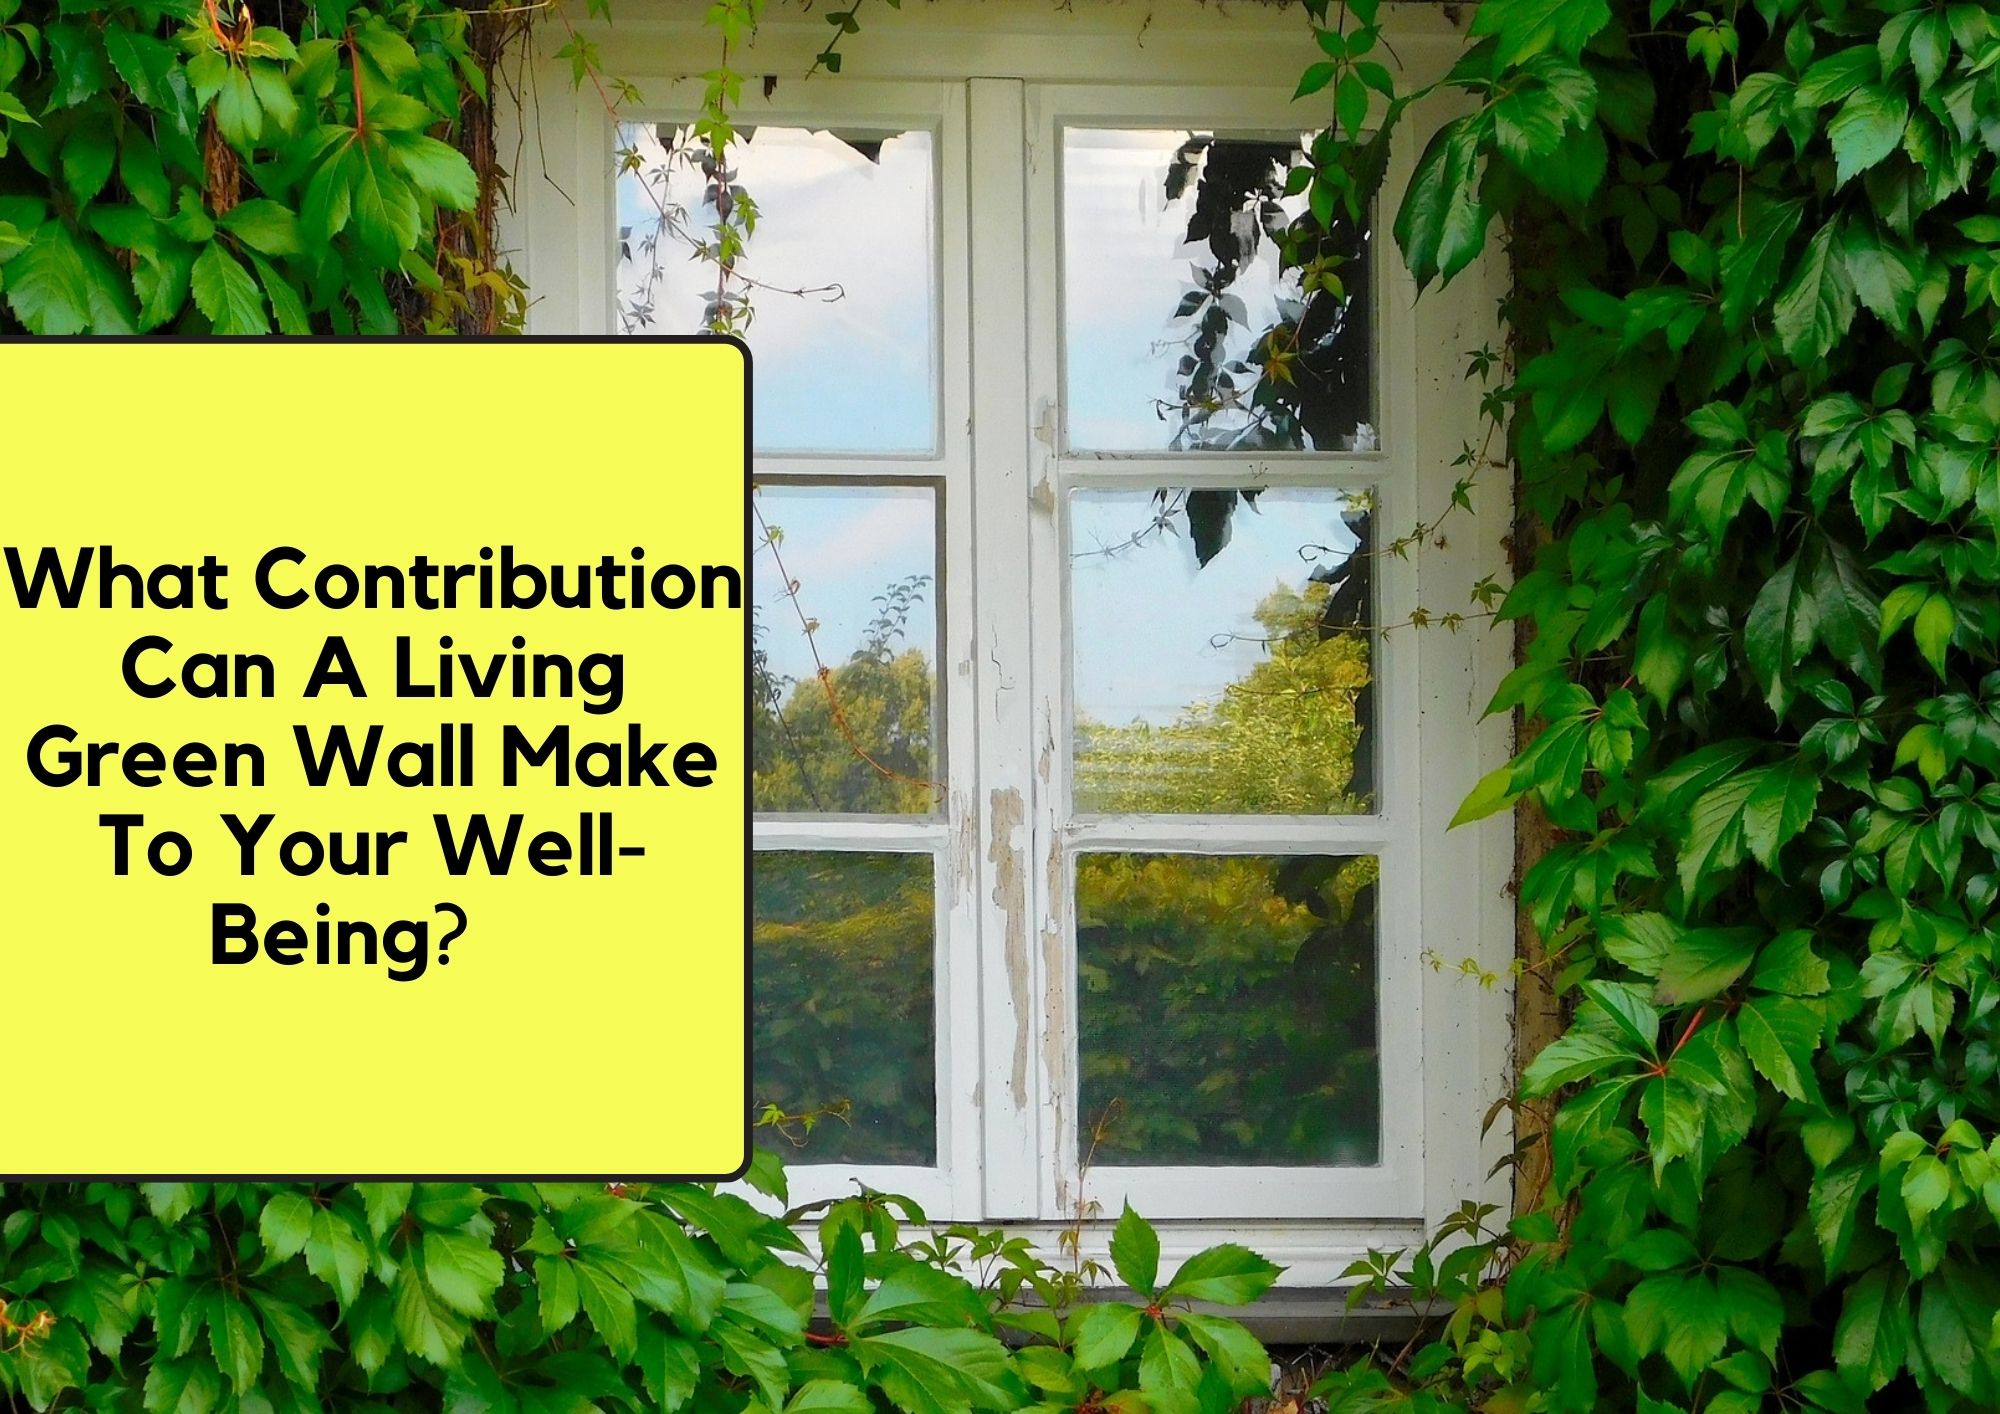 What contribution can a living green wall make to your well-being? living green wall